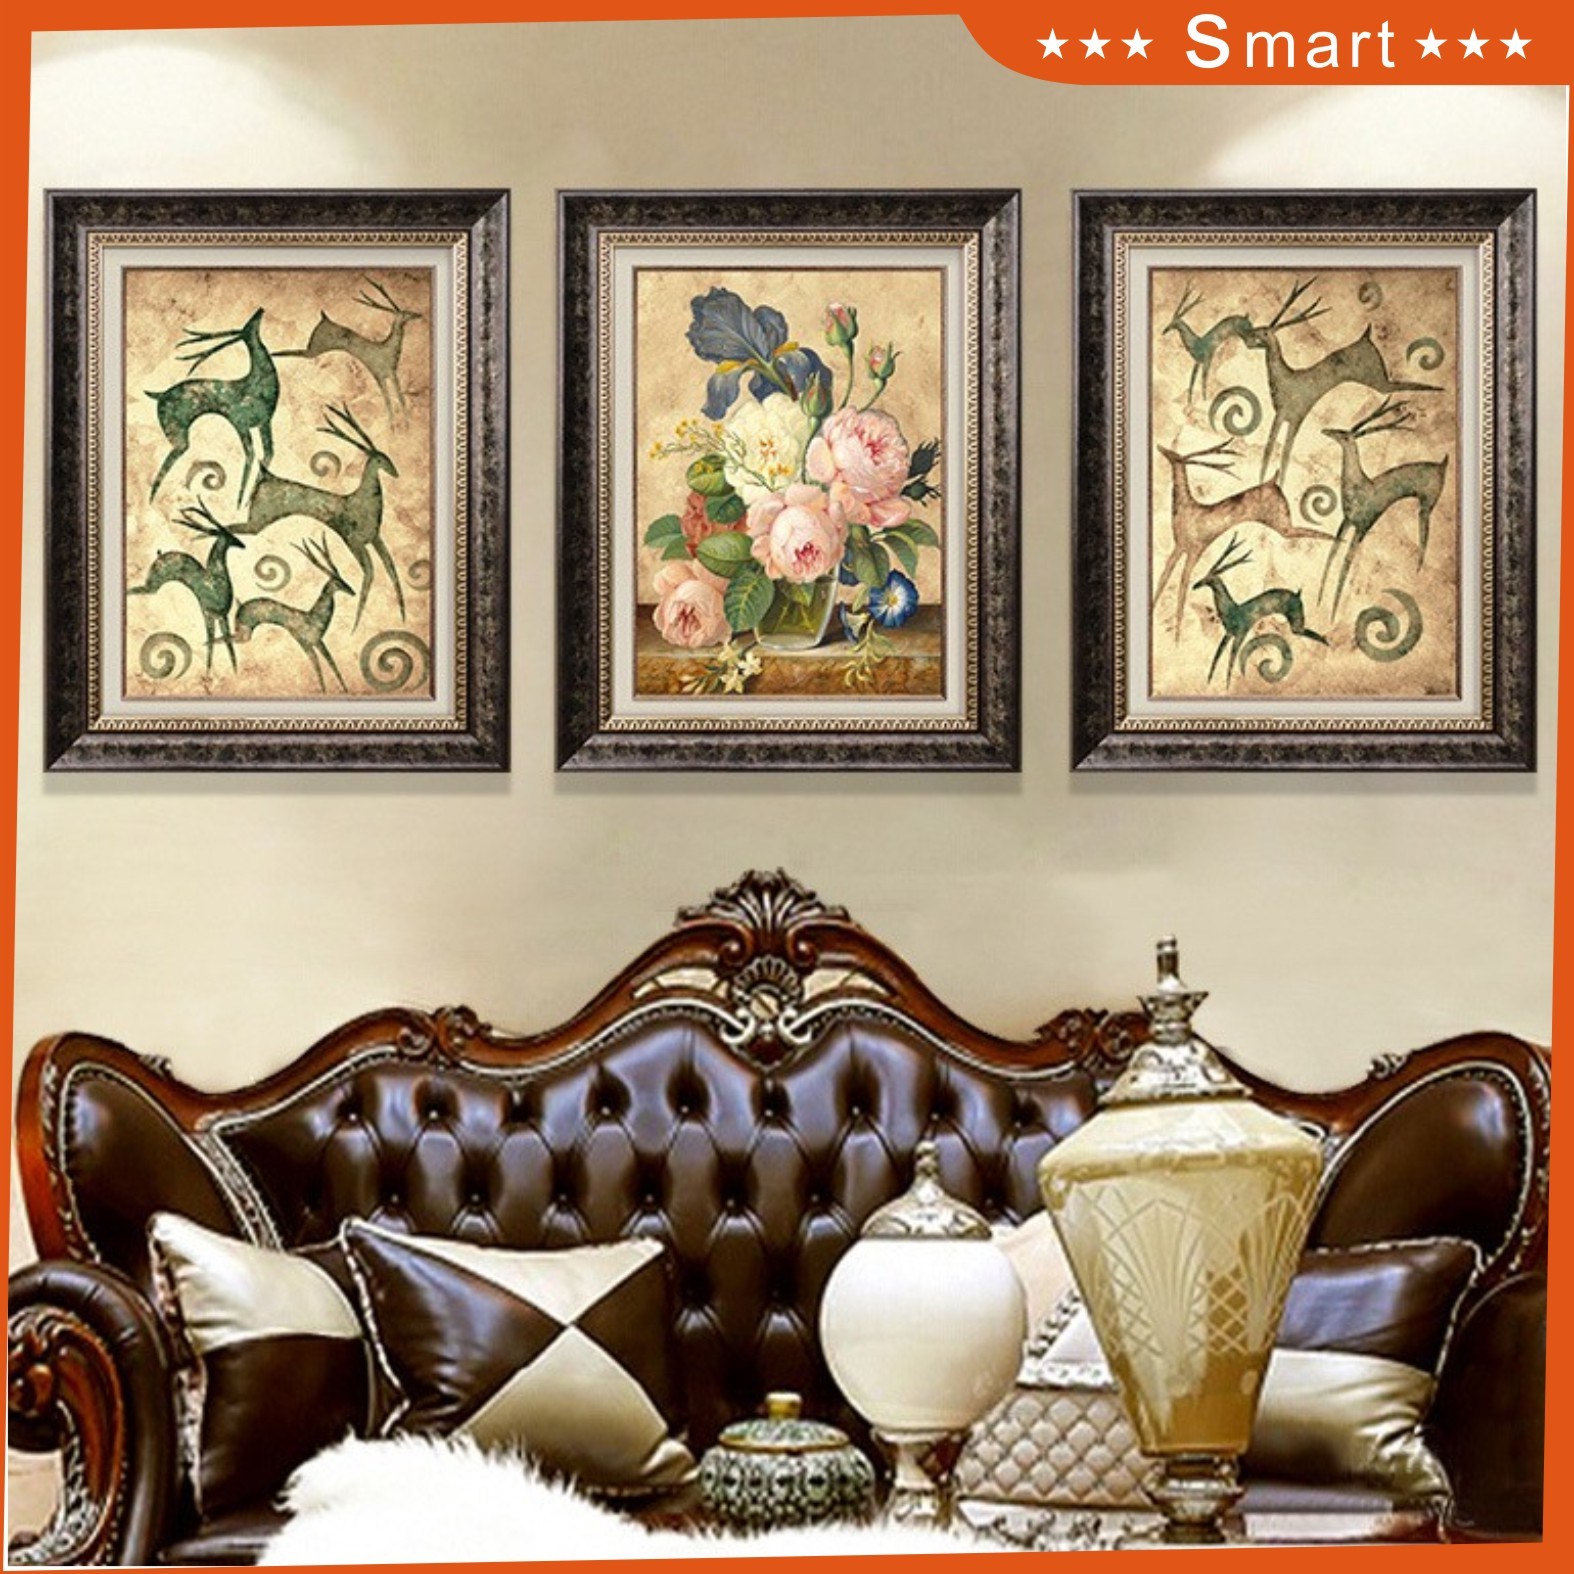 Beautiful Flower Paintings Wall Art on Canvas Used in Hotel Decoration